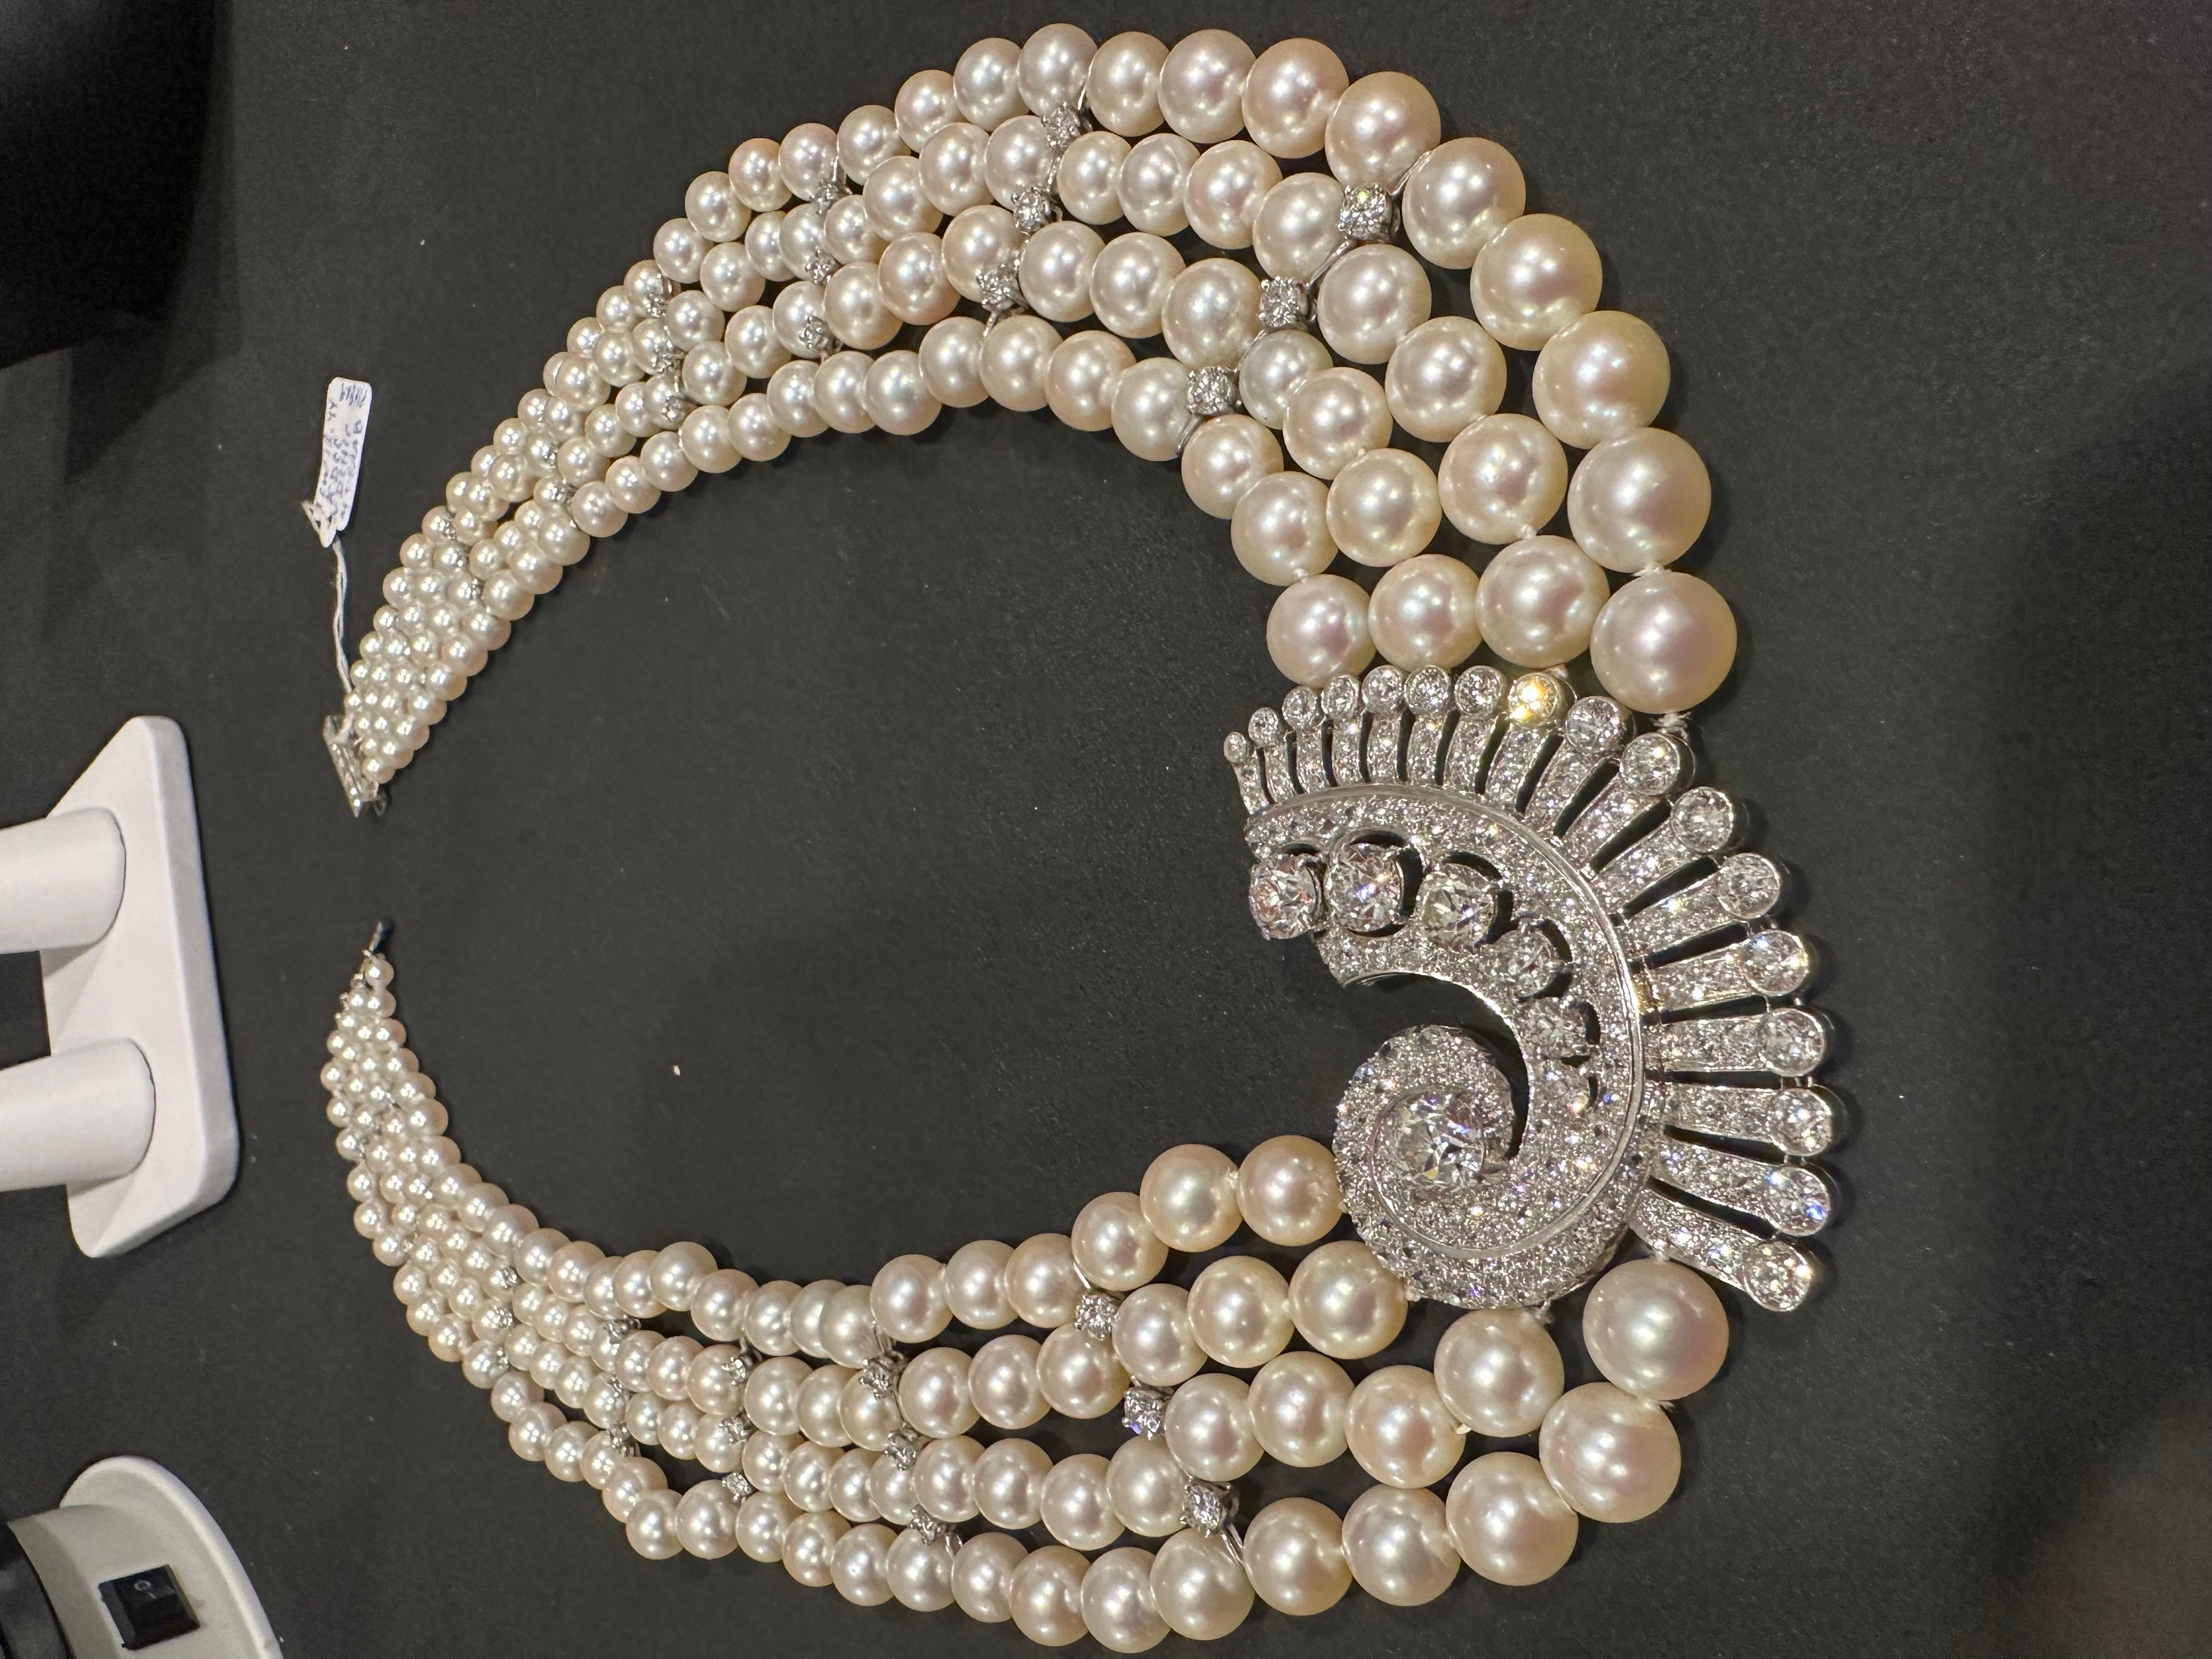 Antique 14.5ct Diamond Center Brooch  with Pearls Necklace in Platinum Bridal For Sale 4